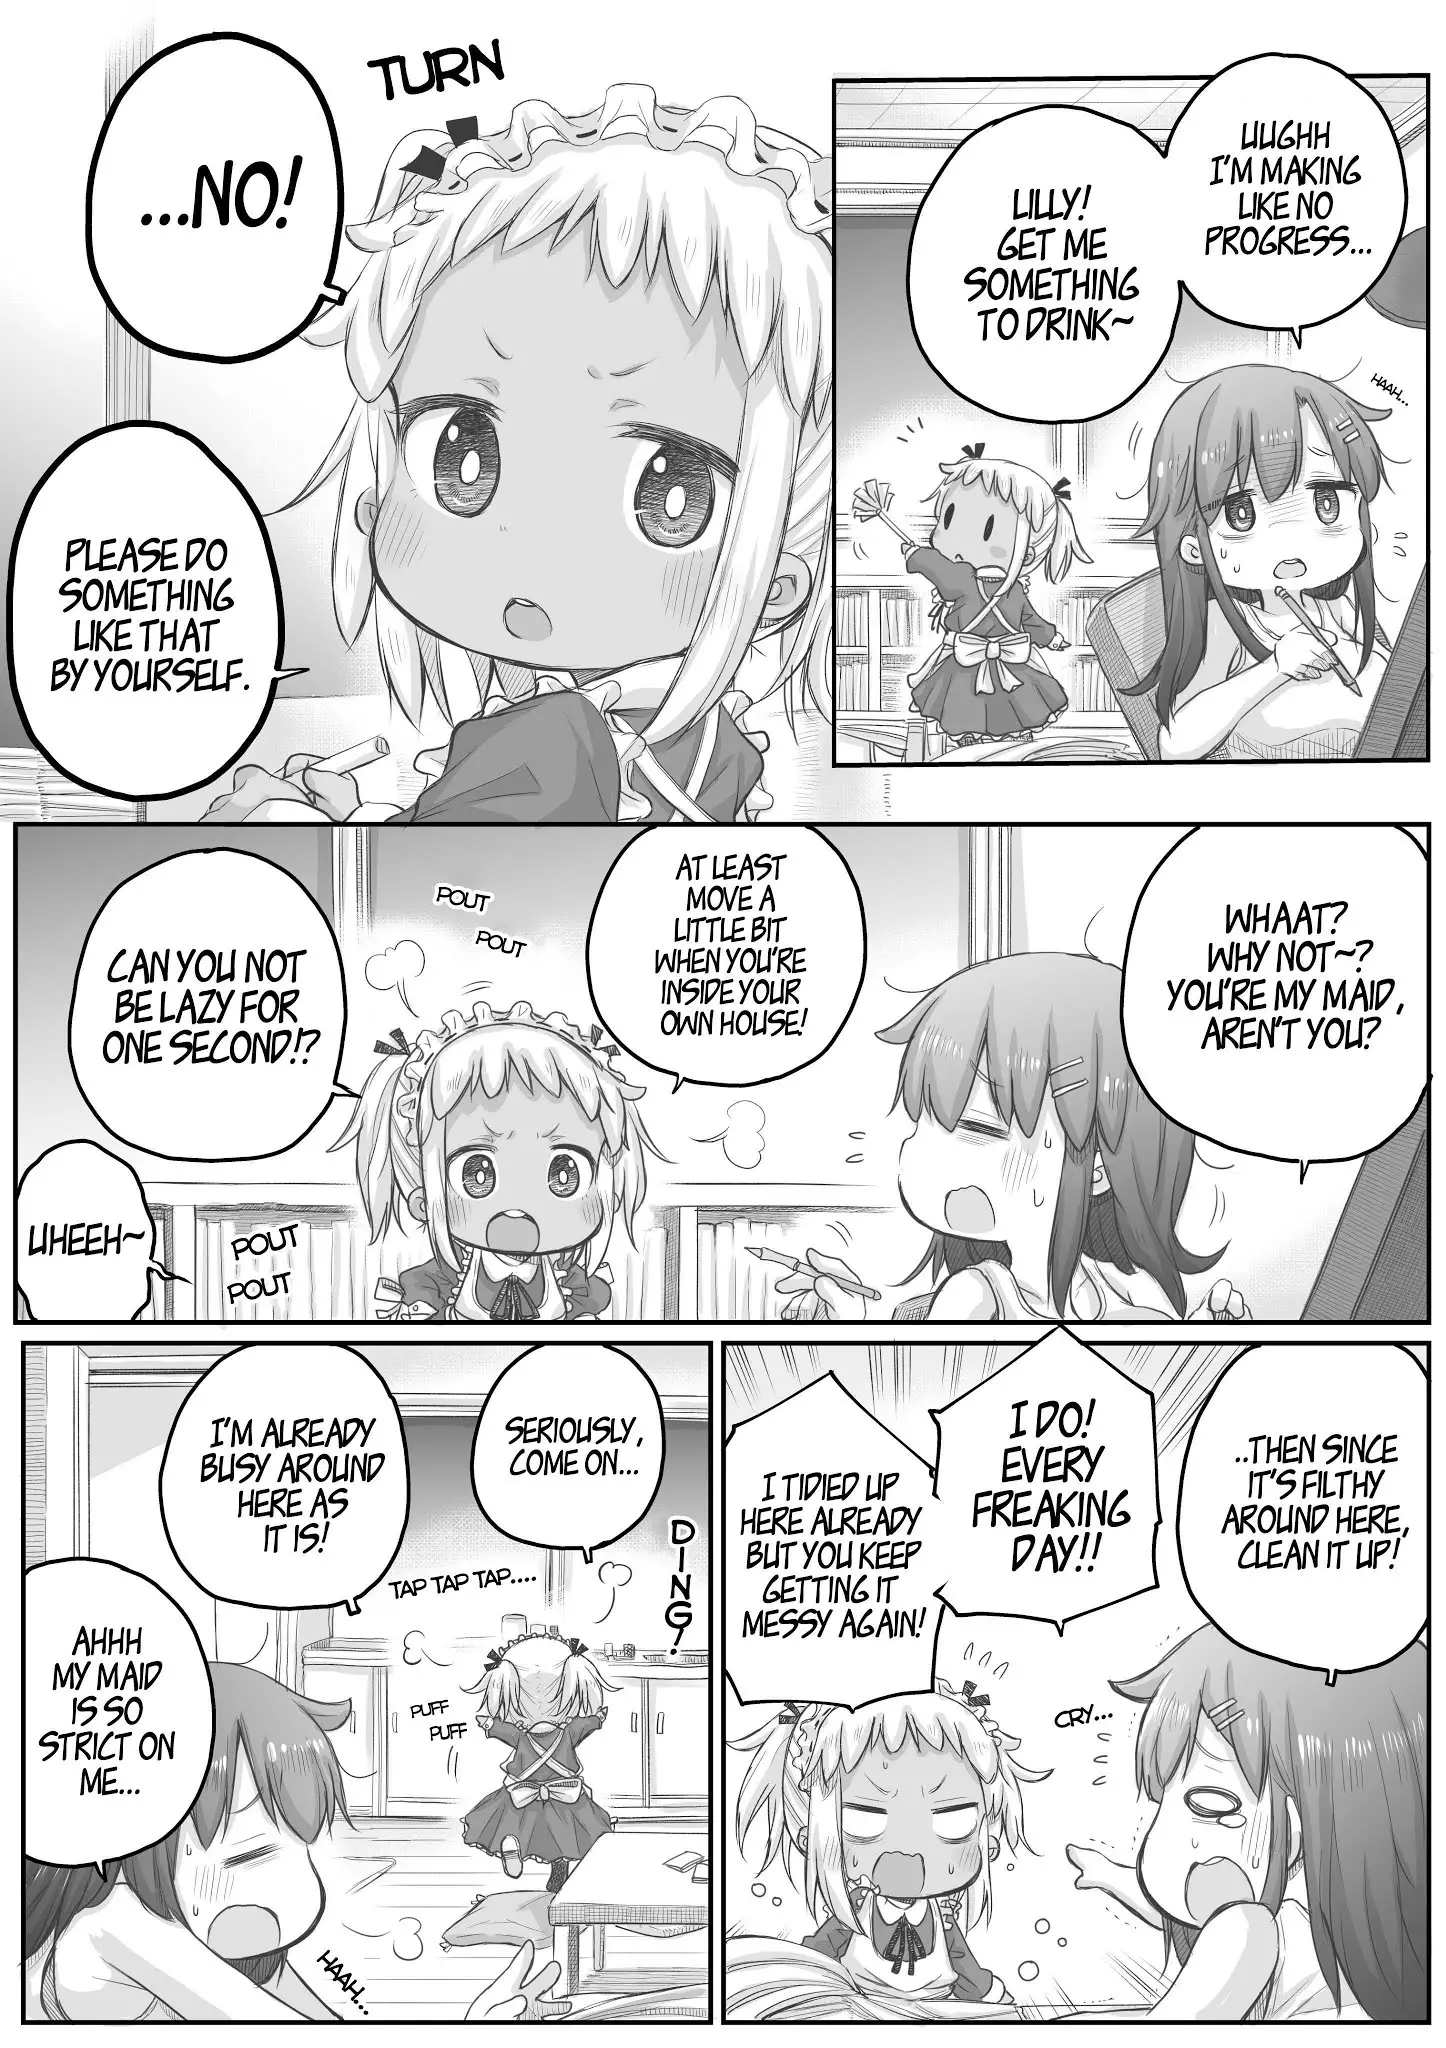 Ms. Corporate Slave Wants To Be Healed By A Loli Spirit - 26 page 1-e3501bc1